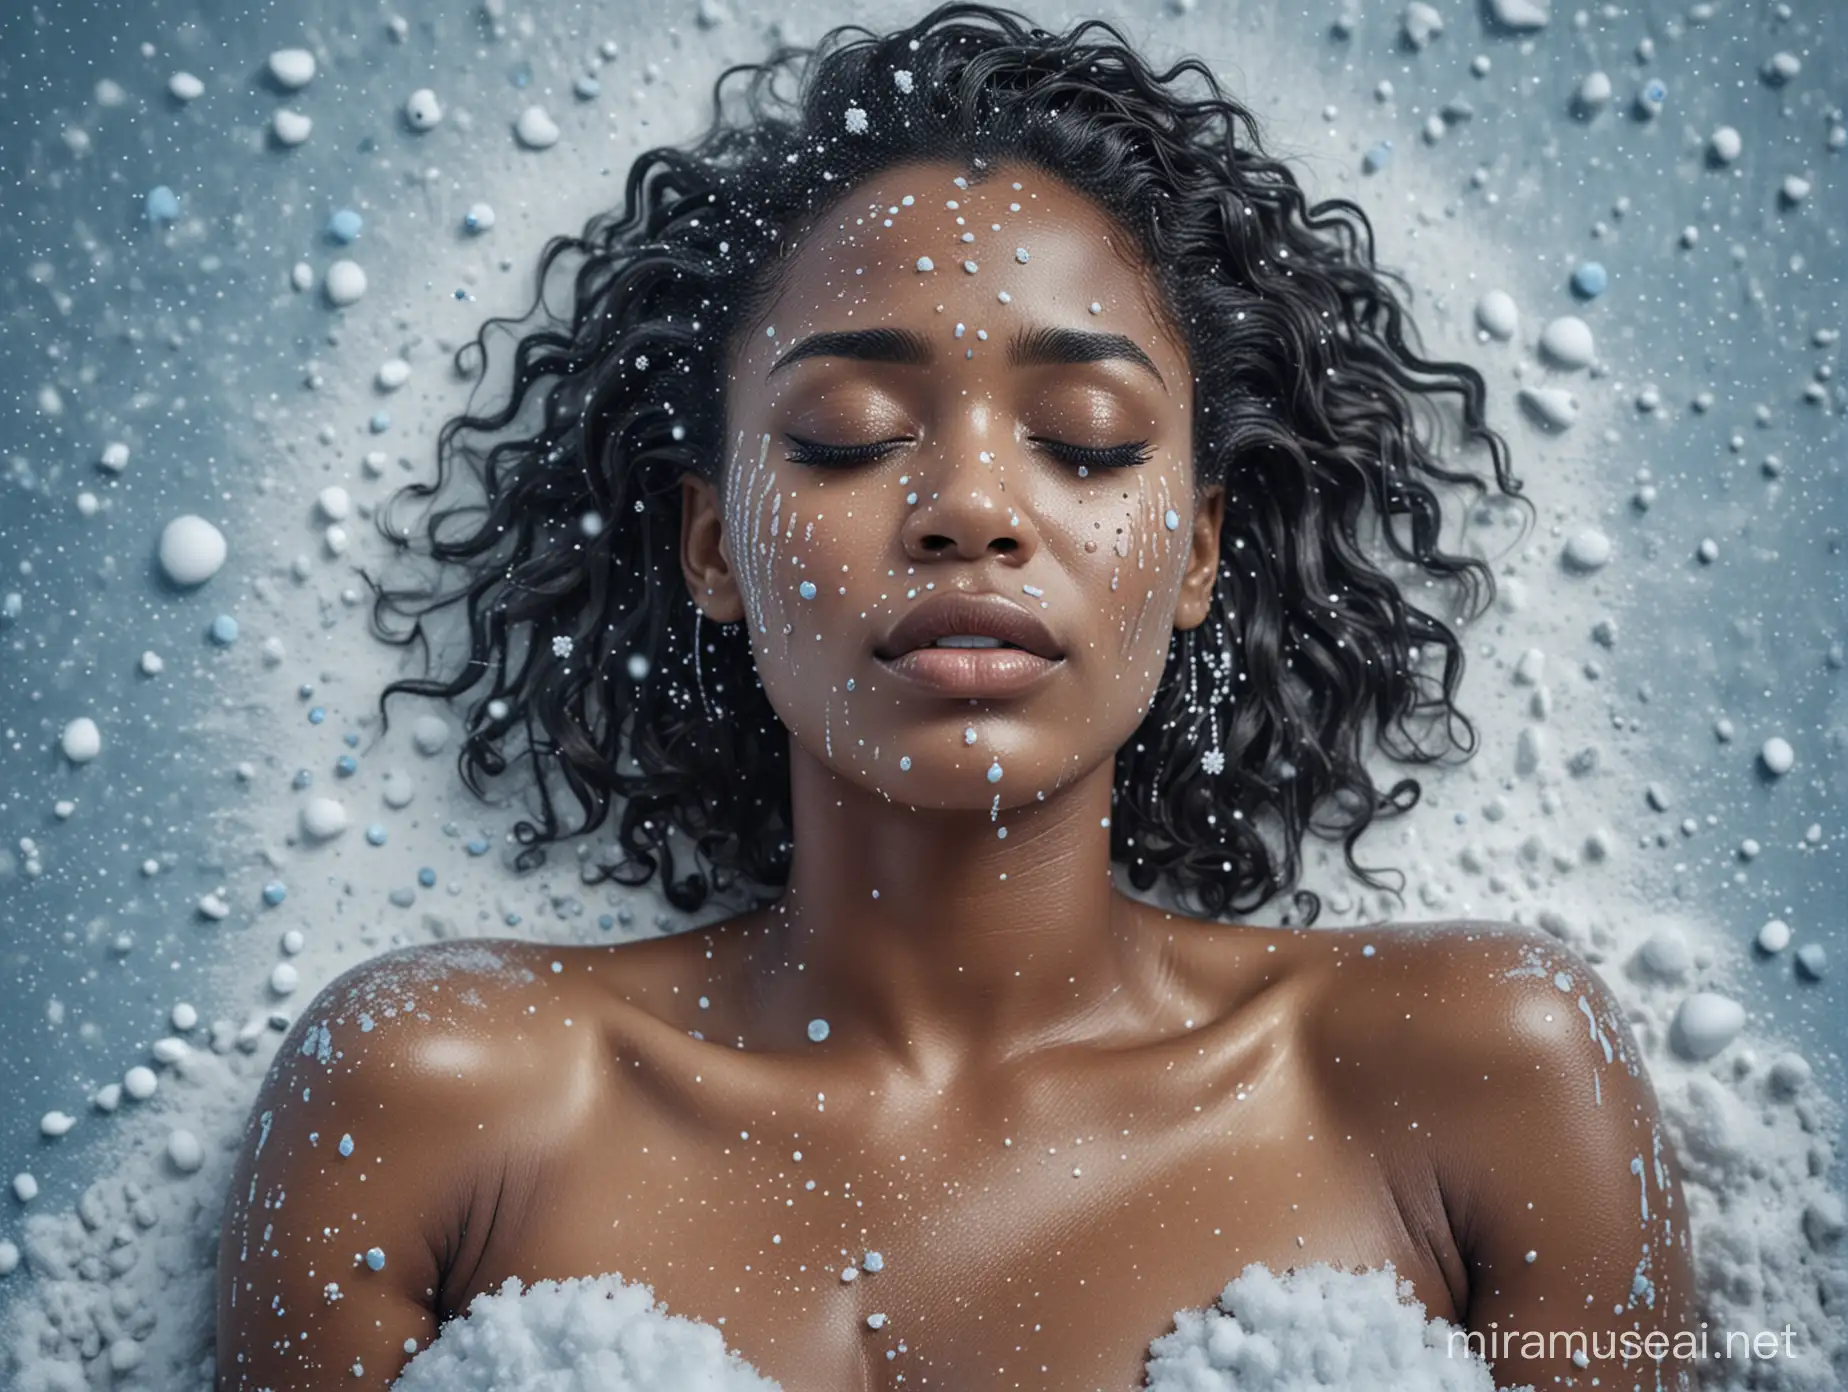 A crying naked African American woman, laying curled up in the snow, while snowing, with silver dots and small shapes, light blue small dots abstract liquid melt background, high fashion, vintage photography, cinematic